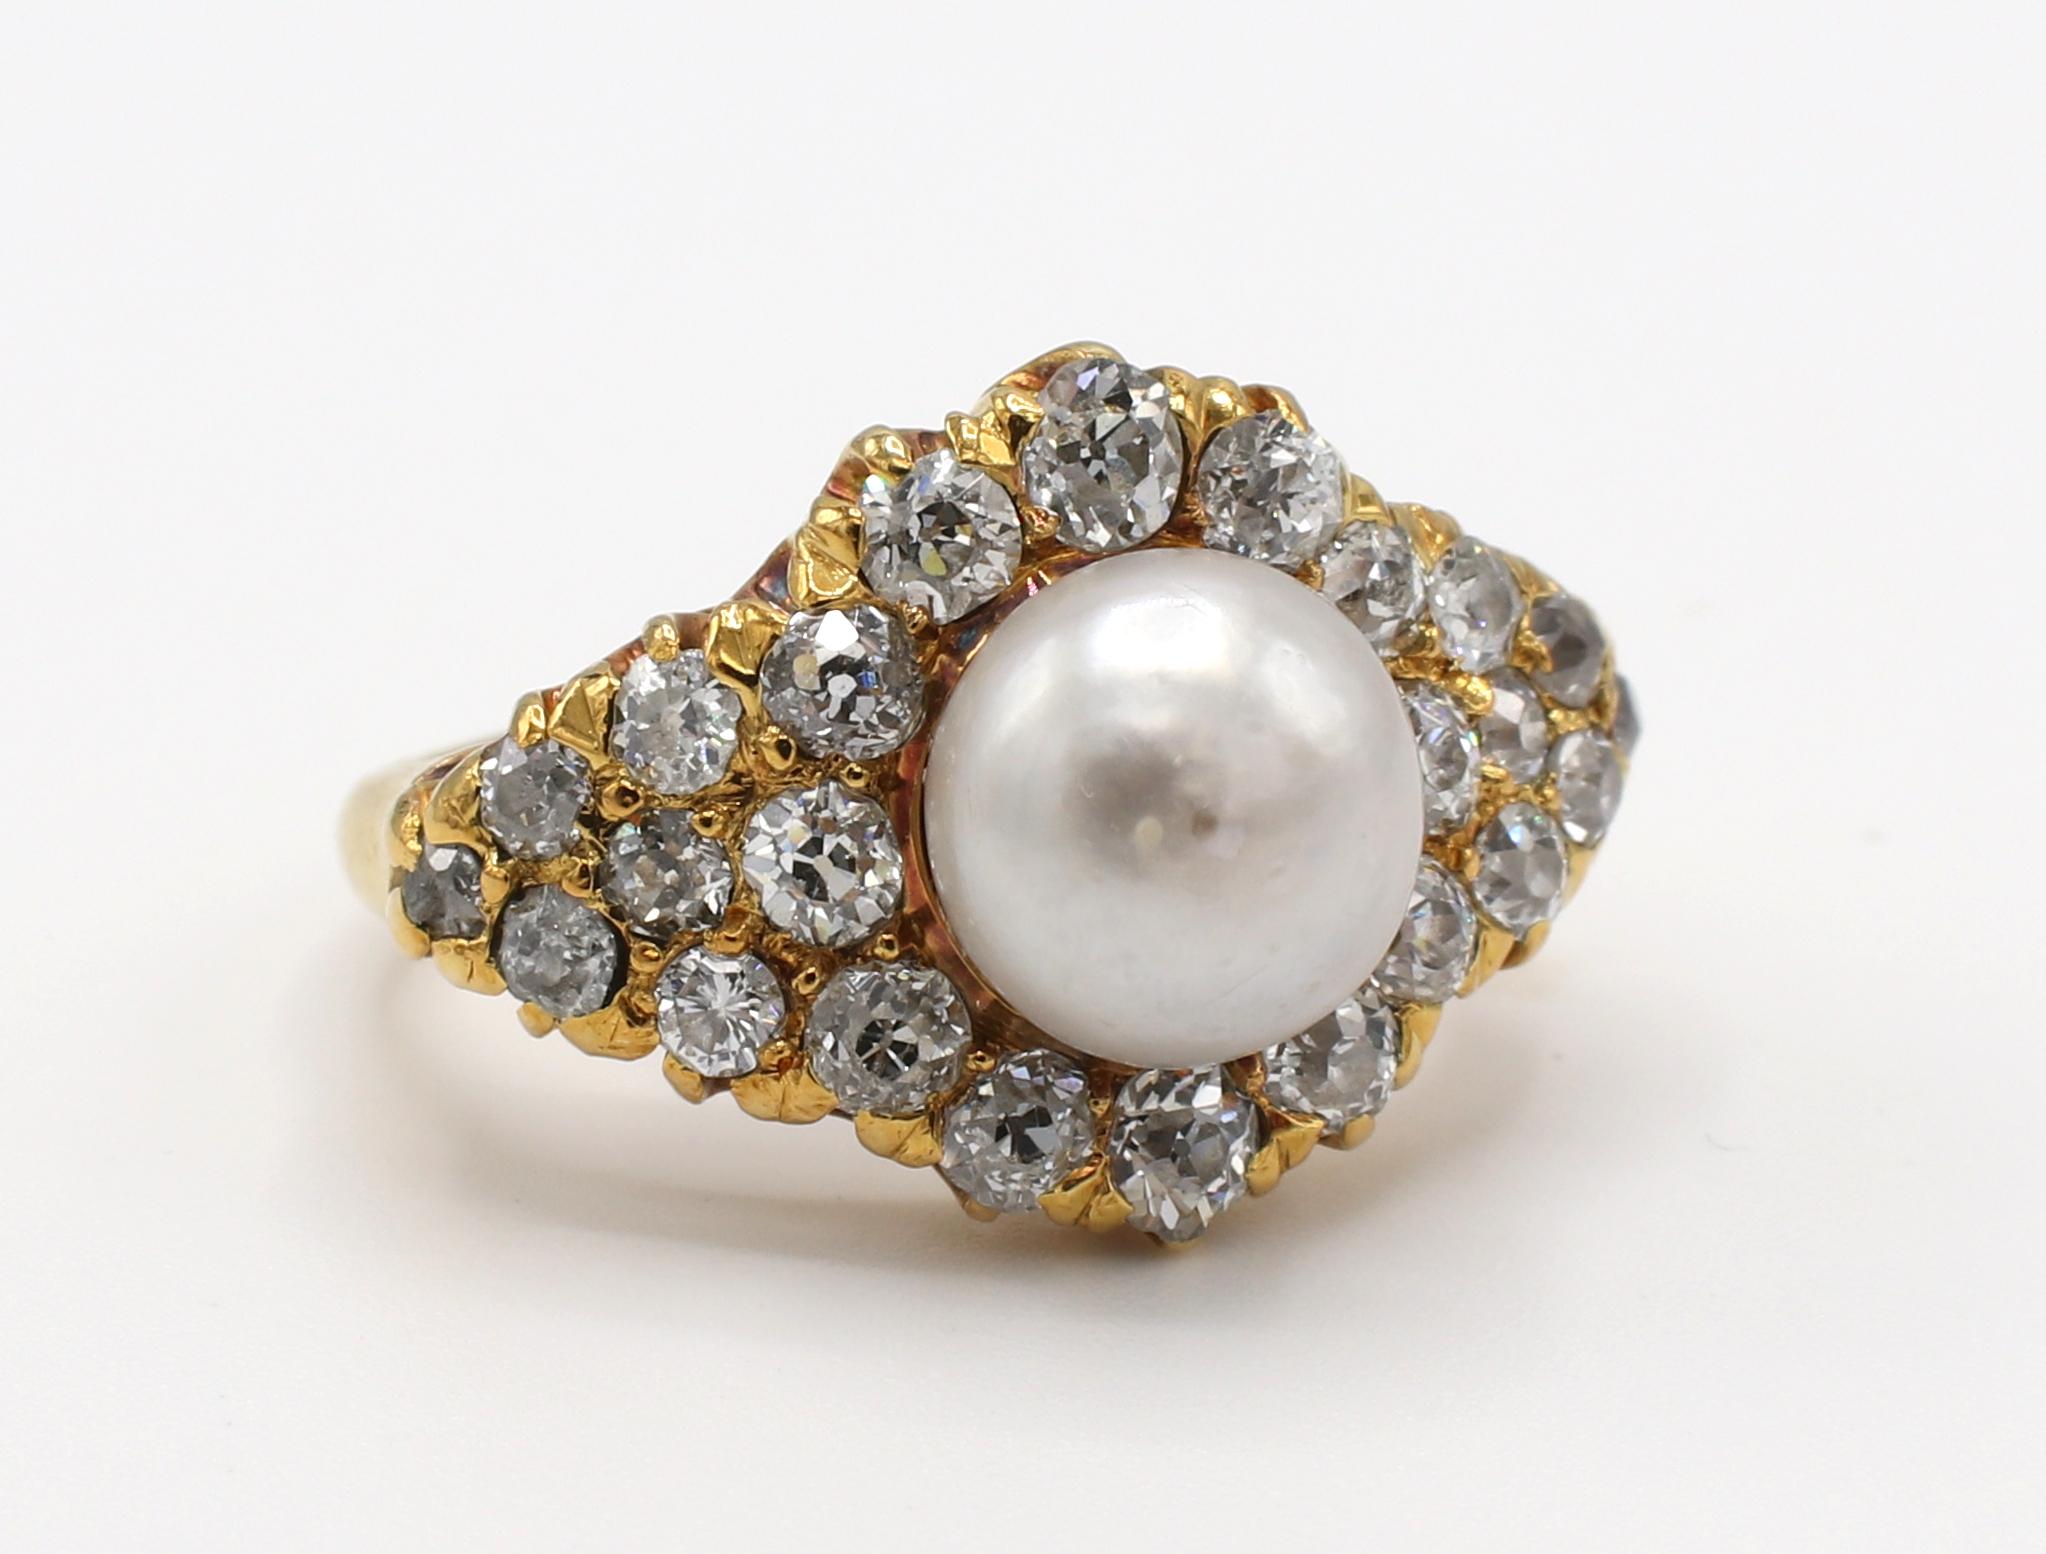 Antique 18 Karat Yellow Gold Old Mine Cut Diamond & Pearl Cluster Ring
Metal: 18k yellow gold
Weight: 6.89 grams
Diamonds: Approx. 1.20 CTW H-I SI
Pearl: 8mm white, creamy luster 
Top: 14.5 x 21.5mm
Size: 4.25 (US)
